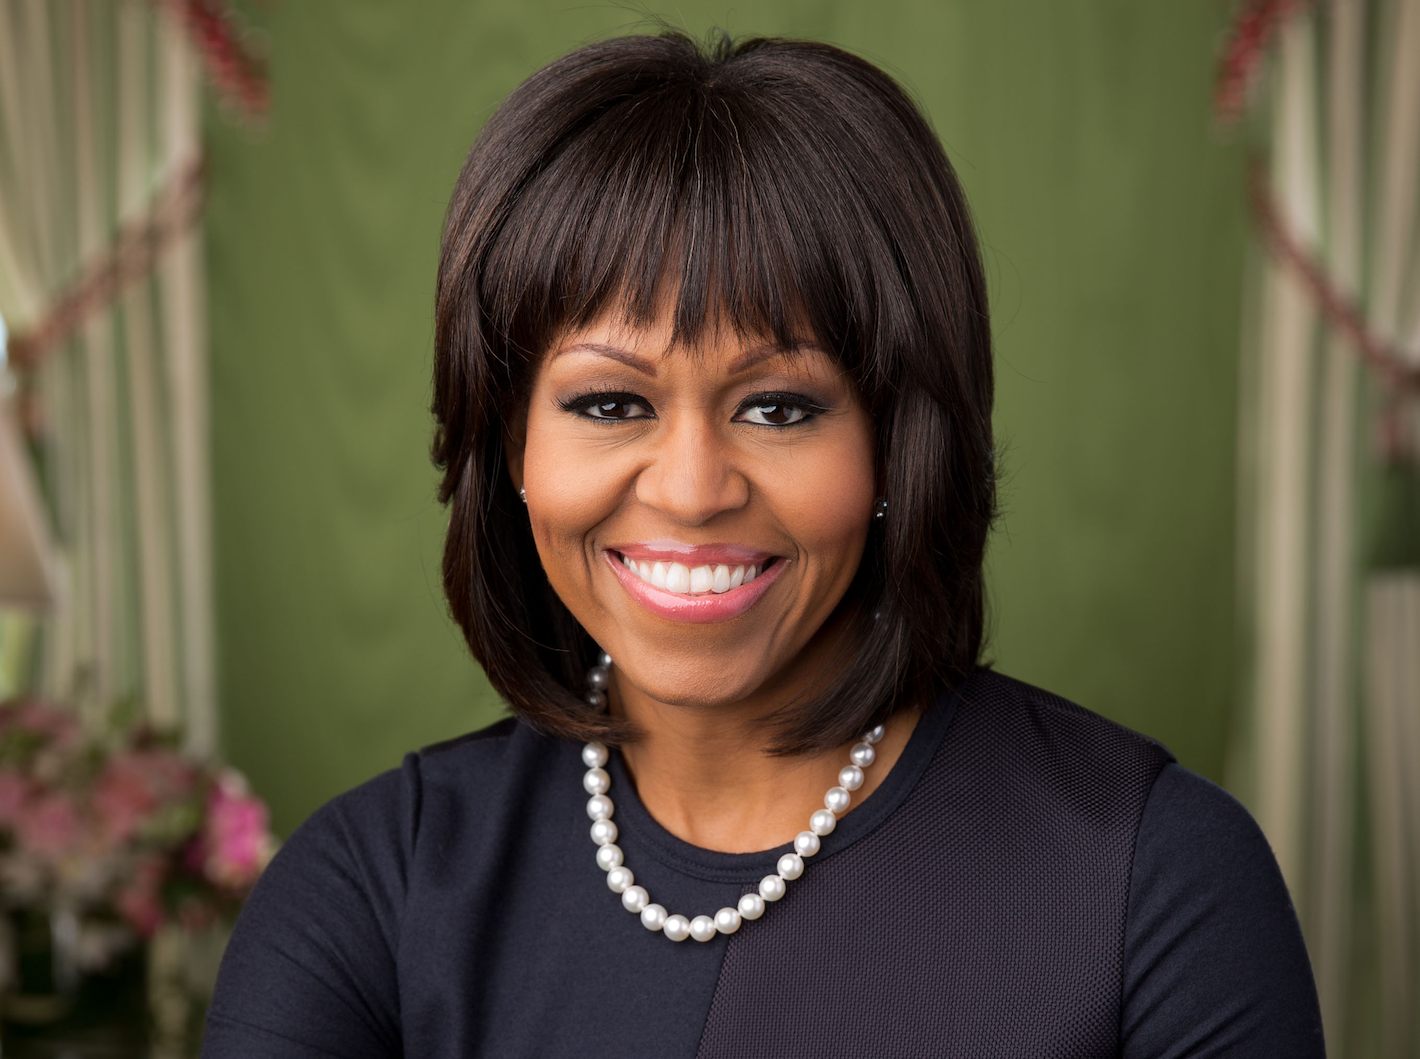 CELEBRITY BOOK REVIEW: Michelle Obama Reviews The Goldfinch by